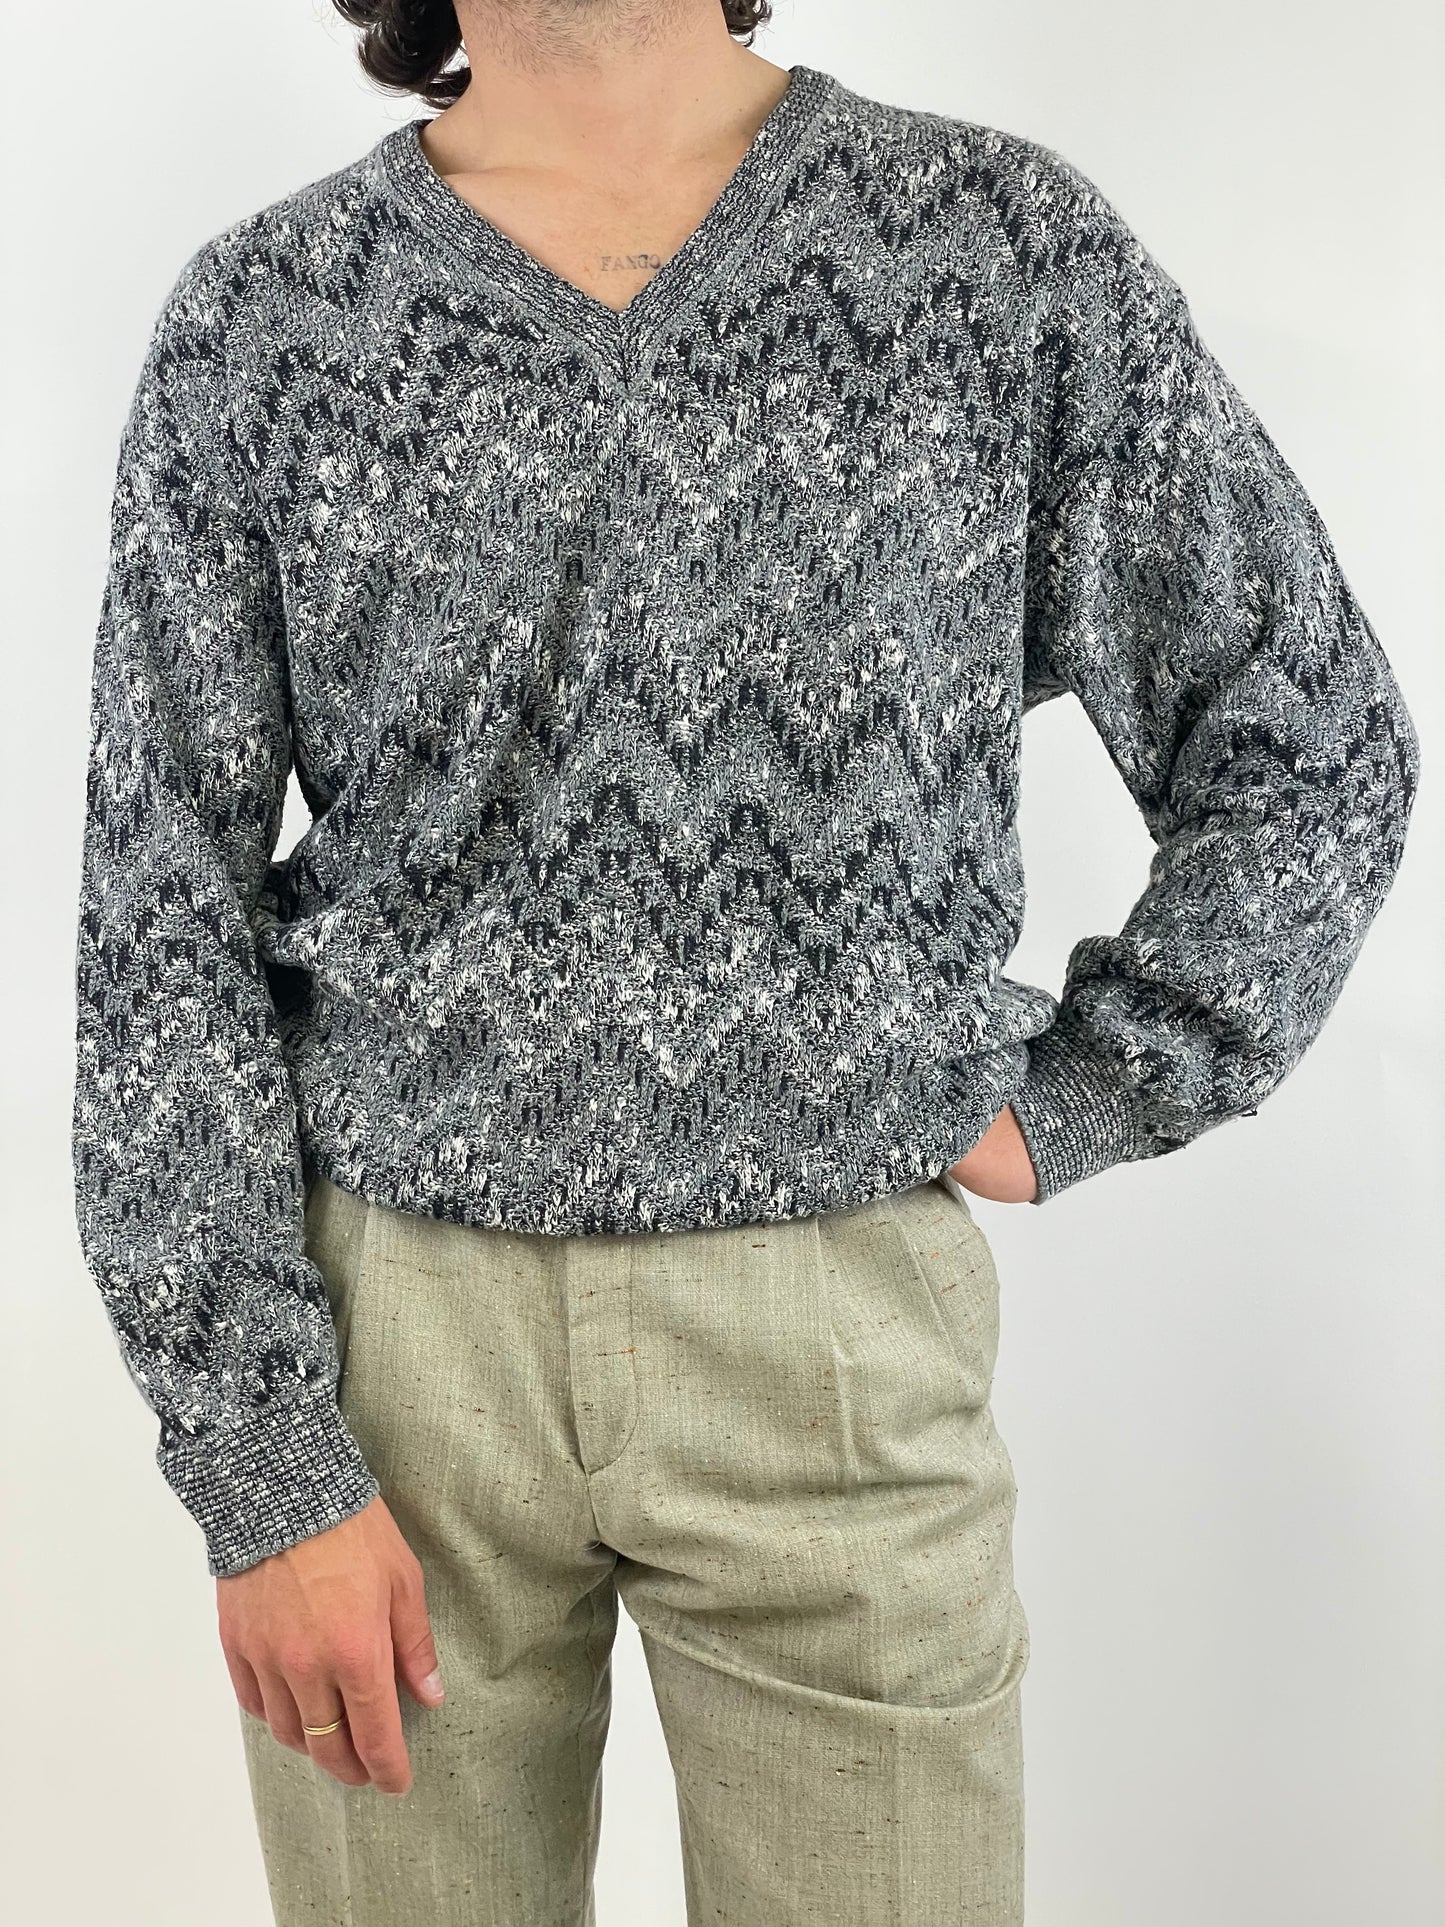 College sweater by Marcazzani 1980s